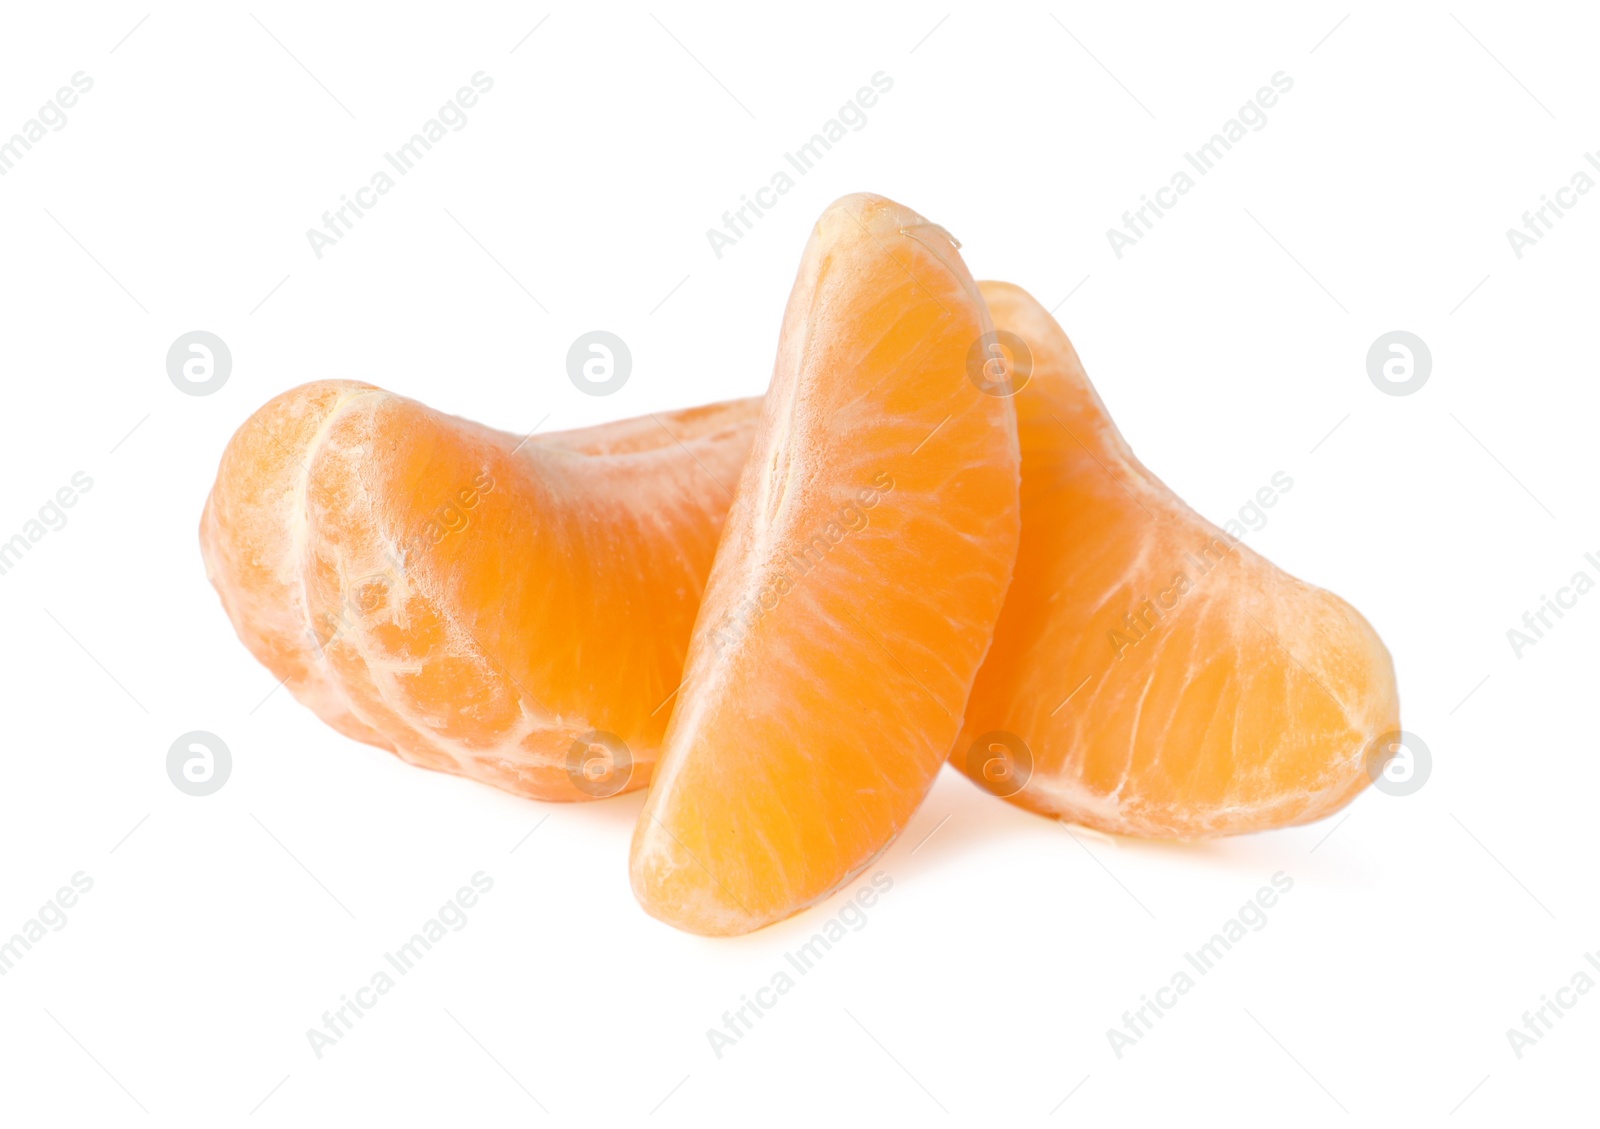 Photo of Pieces of fresh ripe tangerine isolated on white